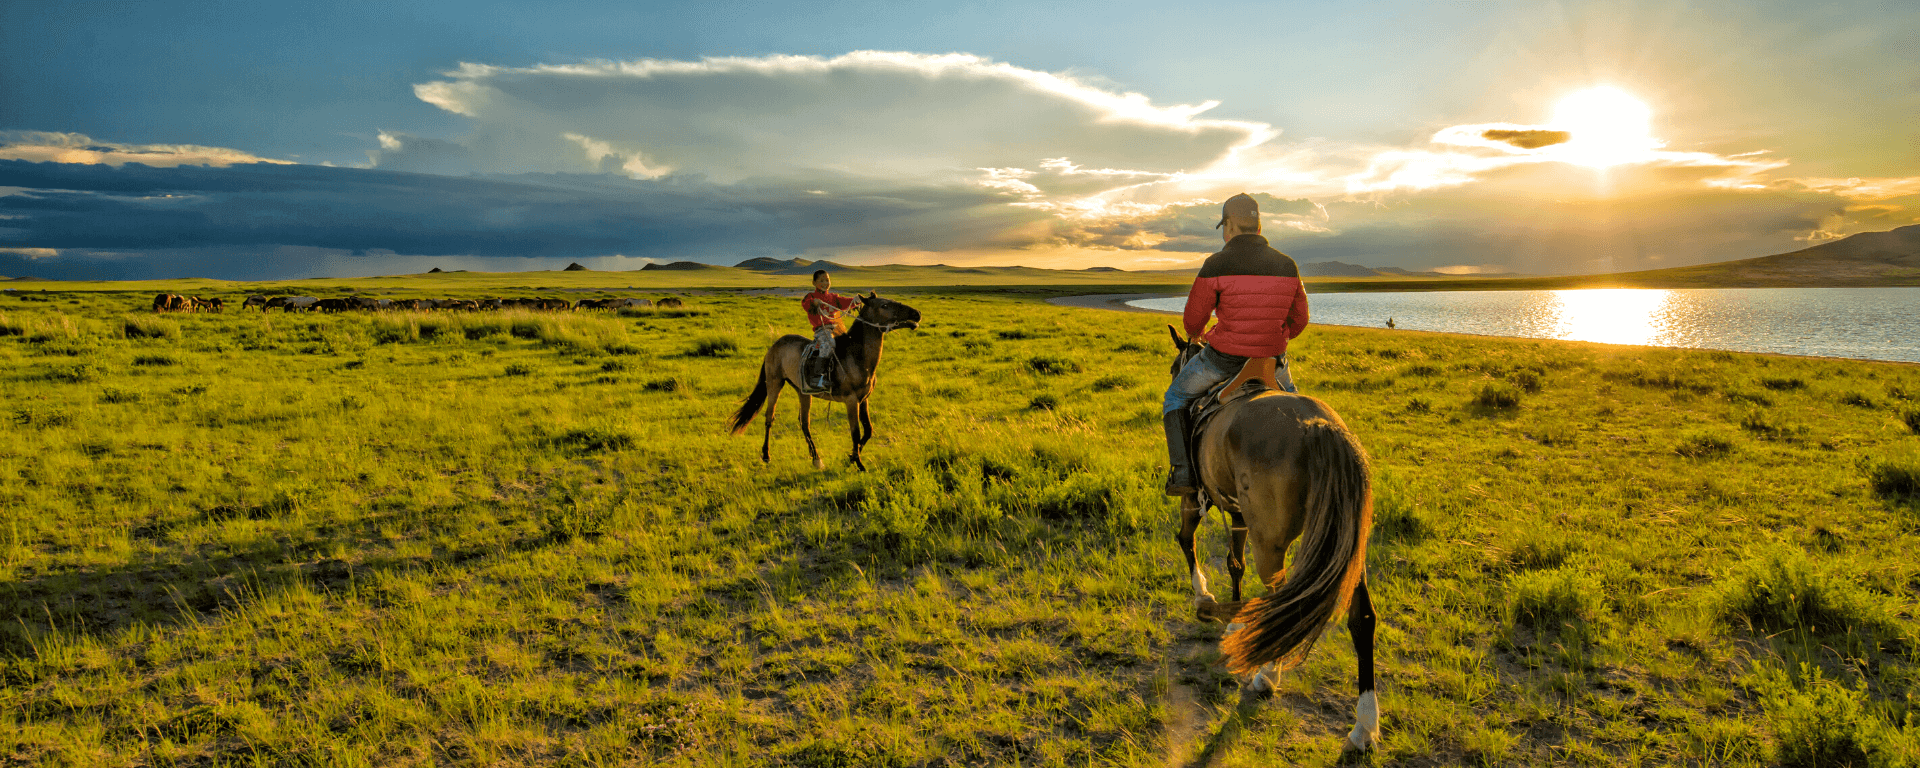 Mongolia Tour Packages